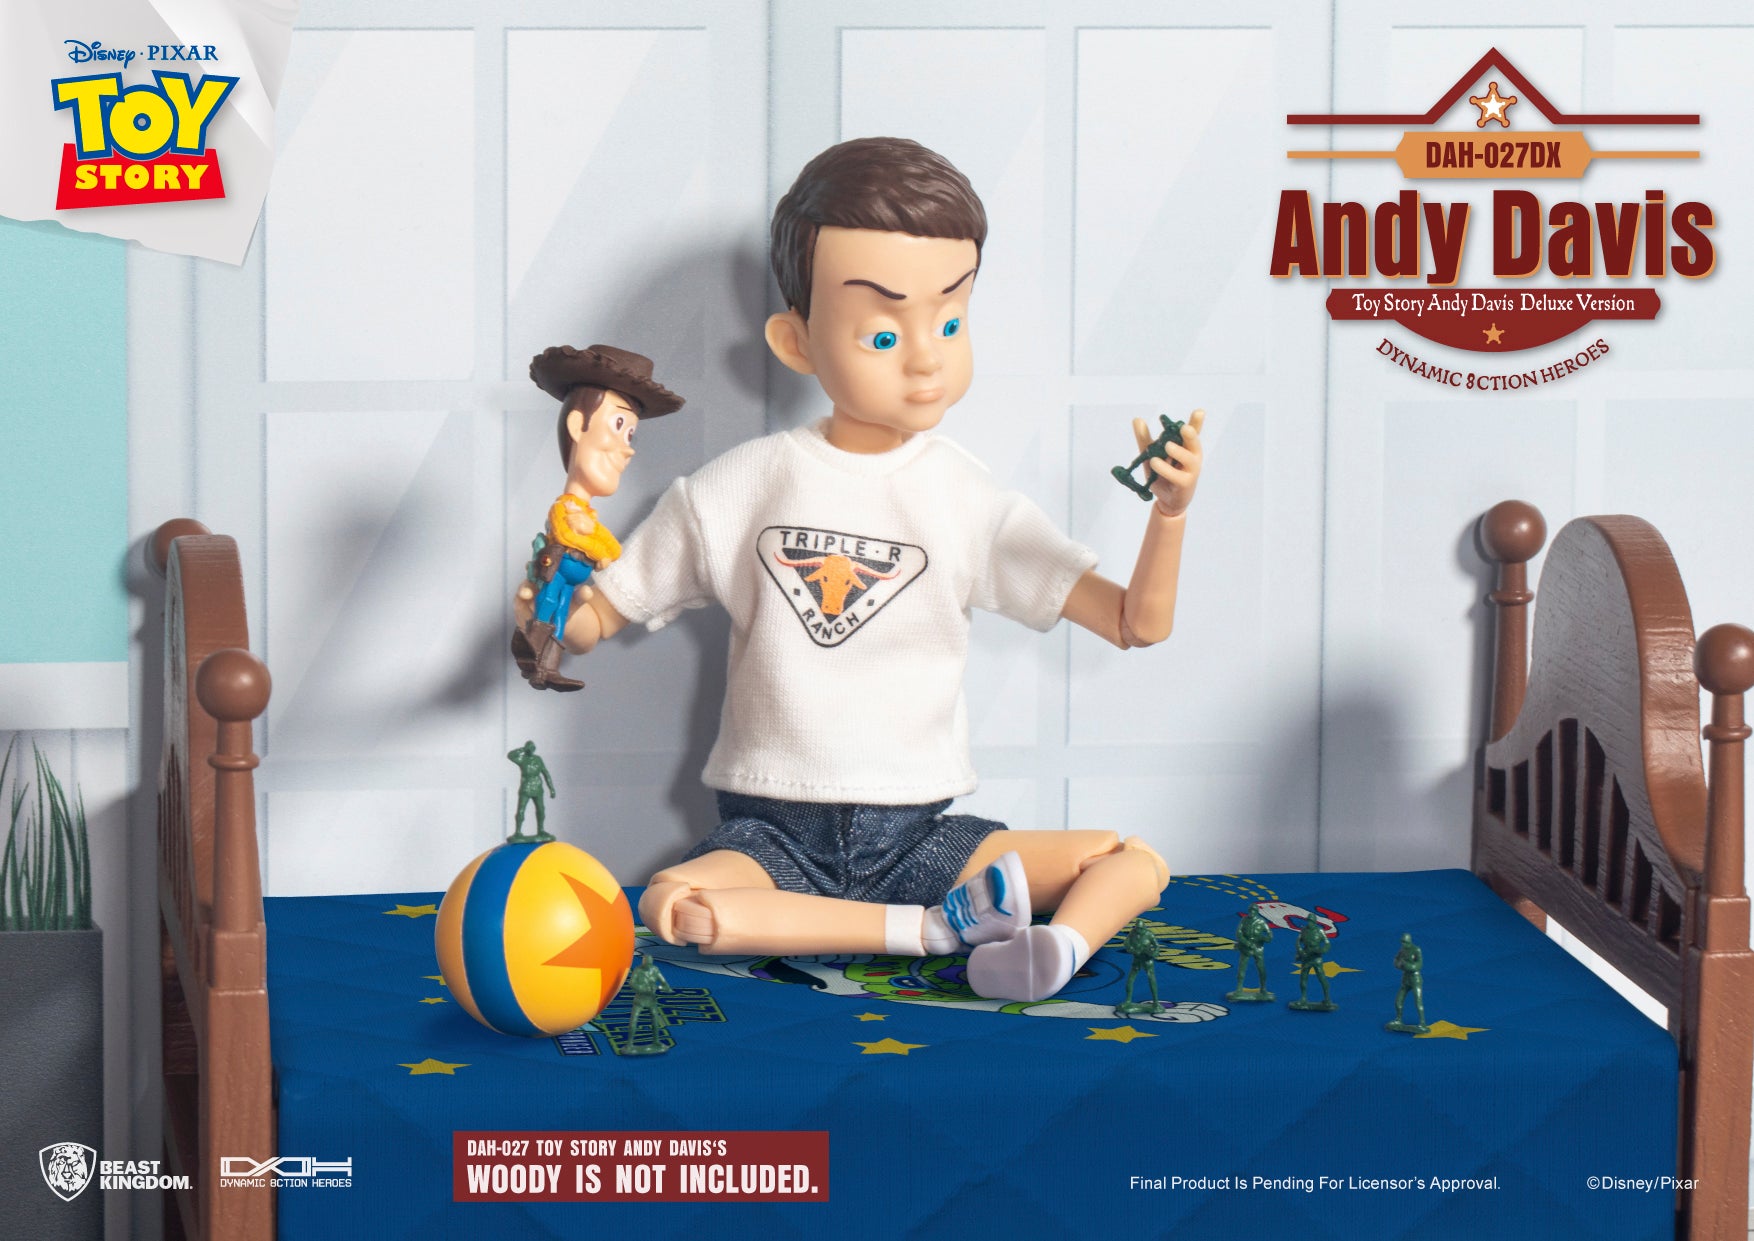 Beast Kingdom Dynamic Action Heroes: Disney Toy Story - Andy Davis Deluxe DAH-027DX